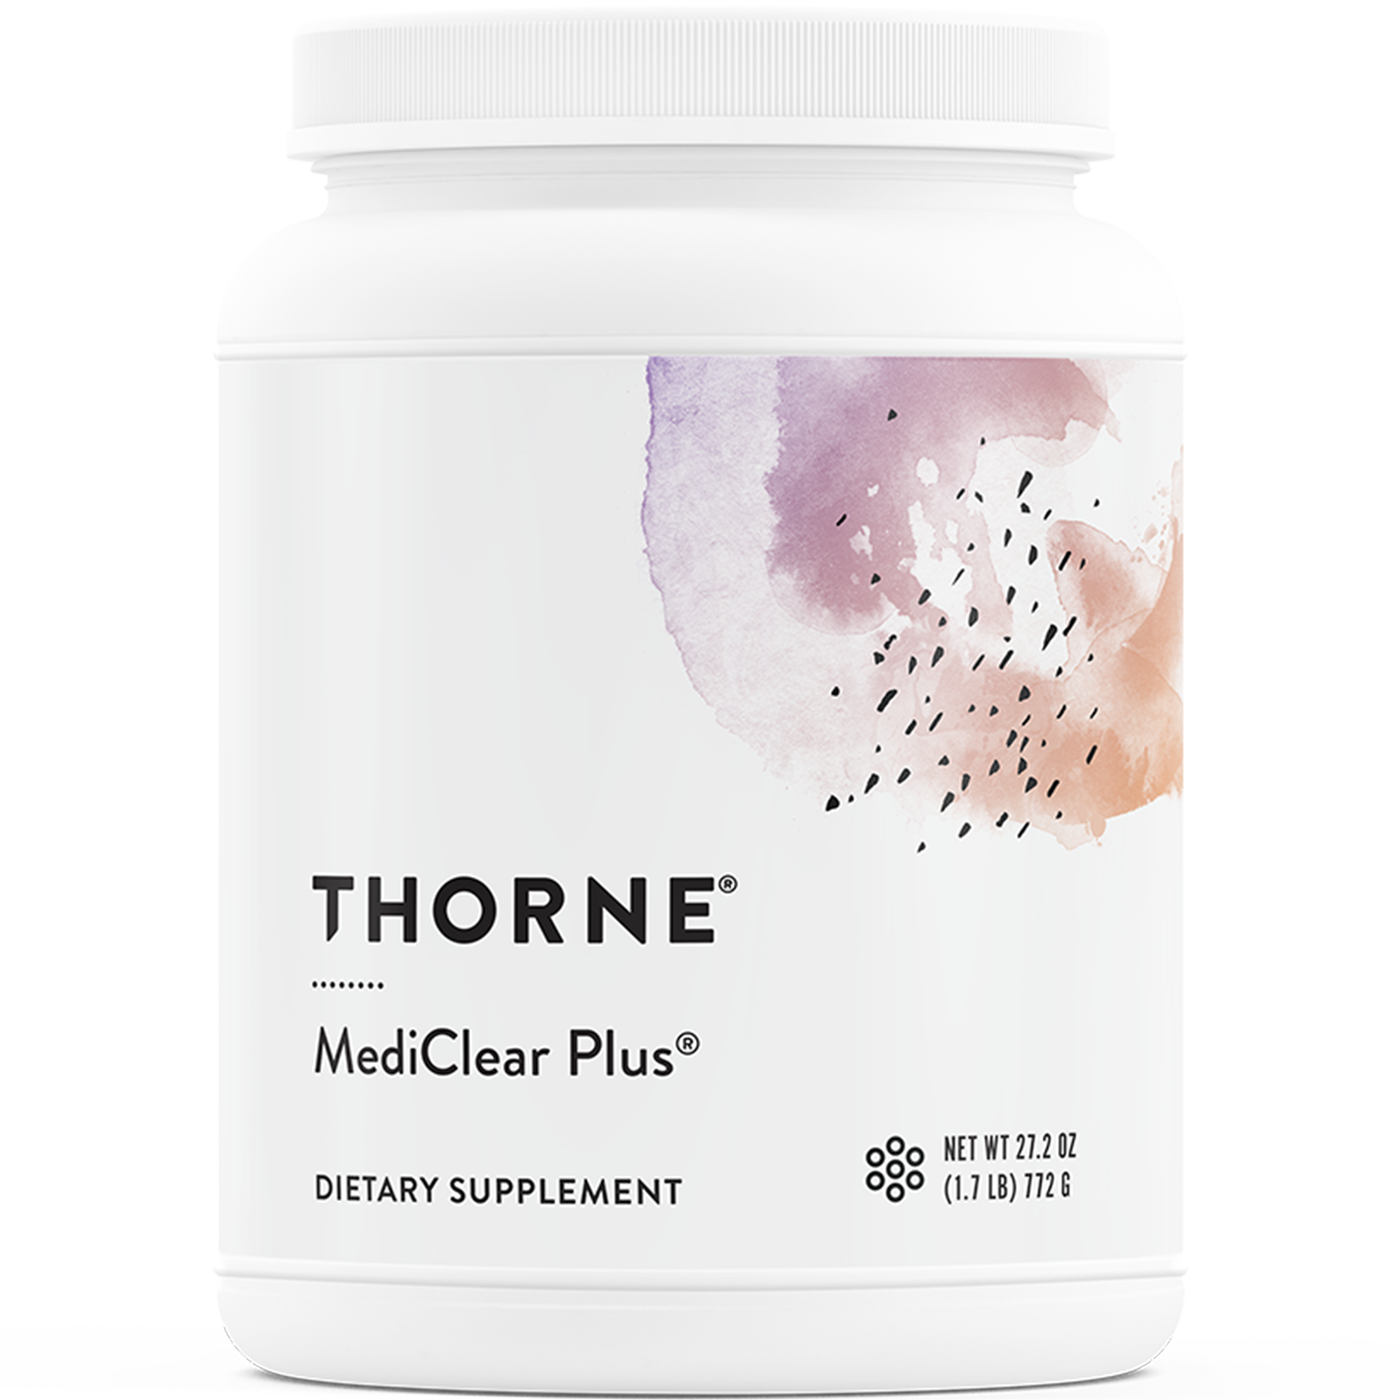 MediClear Plus 27.2 oz Curated Wellness